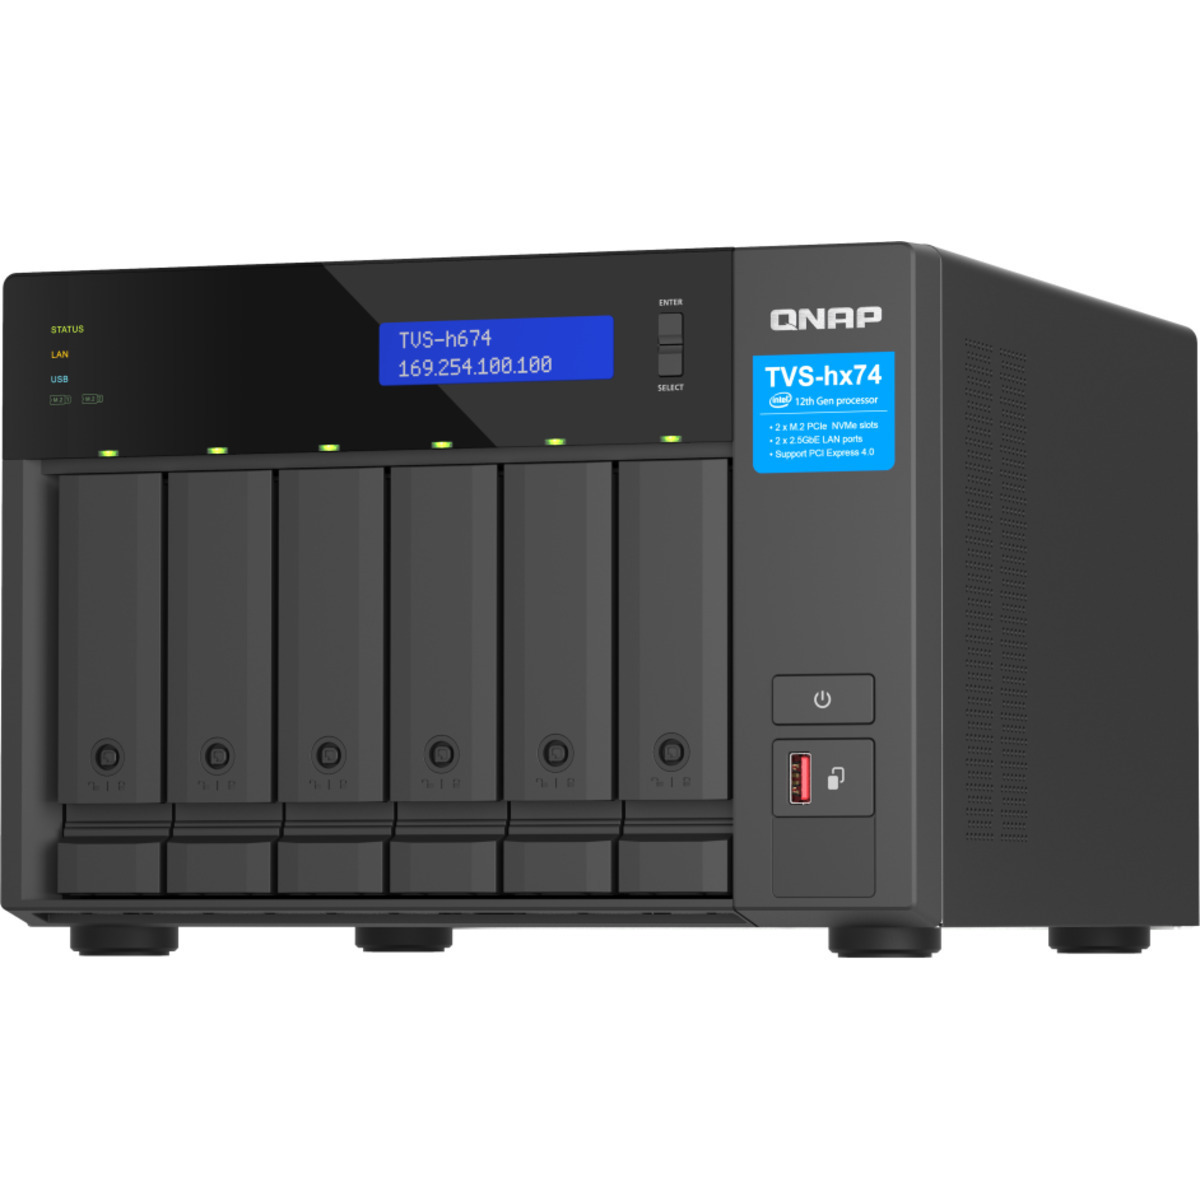 buy QNAP TVS-h674 Core i5 144tb Desktop NAS - Network Attached Storage Device 6x24000gb Western Digital Ultrastar HC580 WUH722424ALE6L4 3.5 7200rpm SATA 6Gb/s HDD ENTERPRISE Class Drives Installed - Burn-In Tested - nas headquarters buy network attached storage server device das new raid-5 free shipping usa spring sale TVS-h674 Core i5